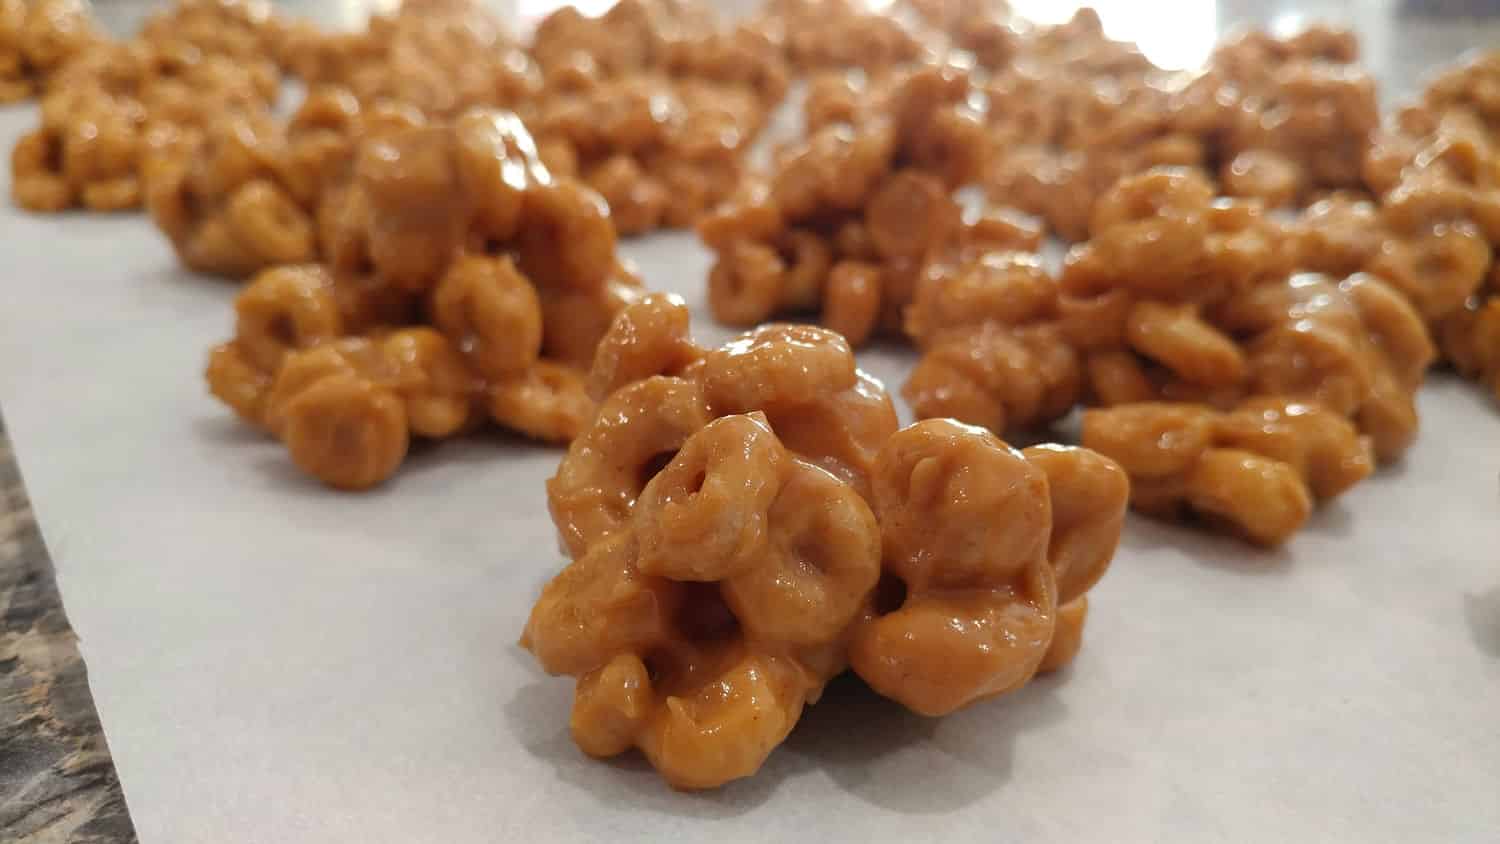 Peanut butter honey nut cereal clusters